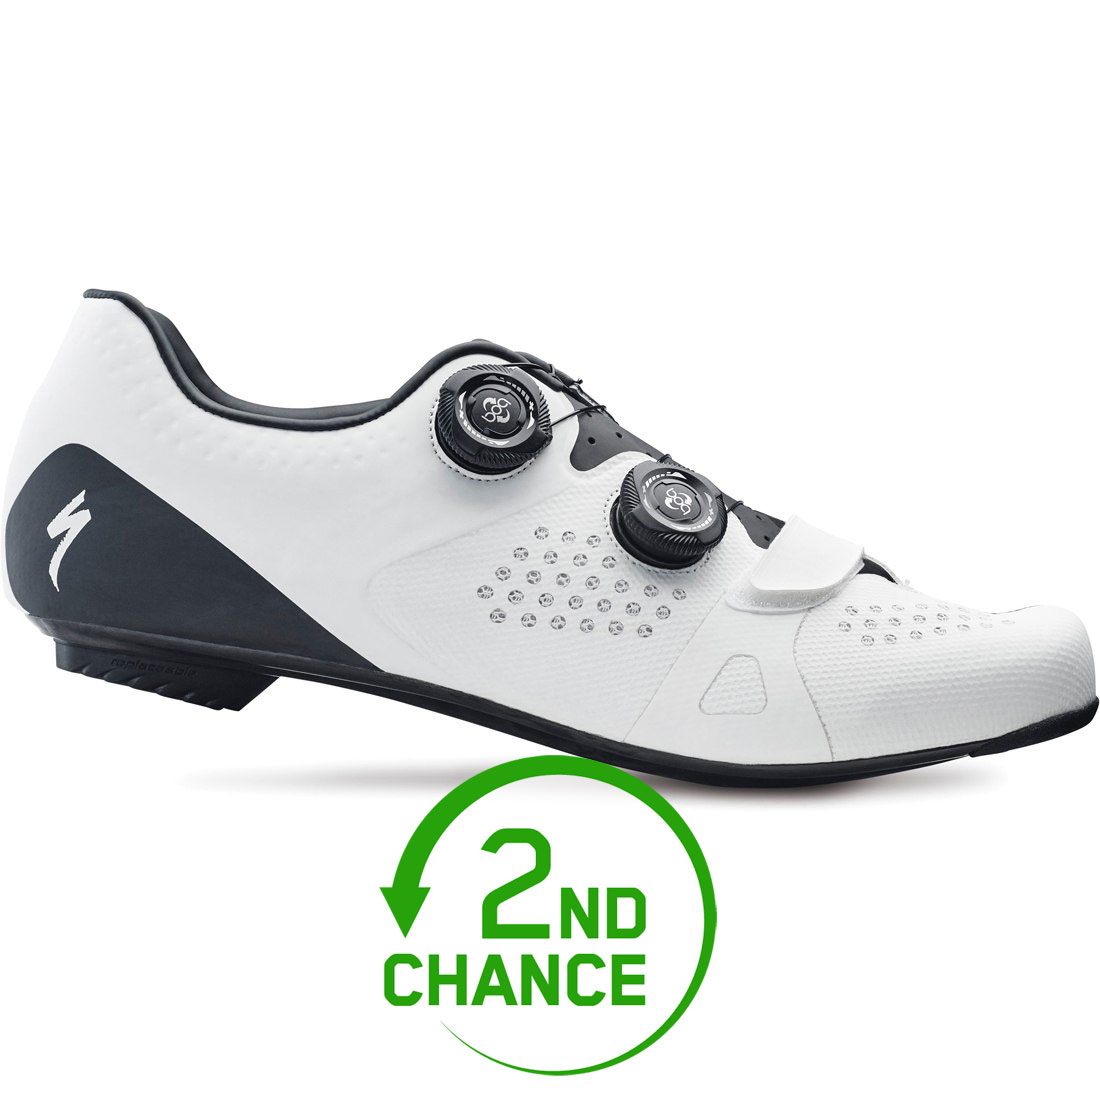 Picture of Specialized Torch 3.0 Road Shoes - White - 2nd Choice